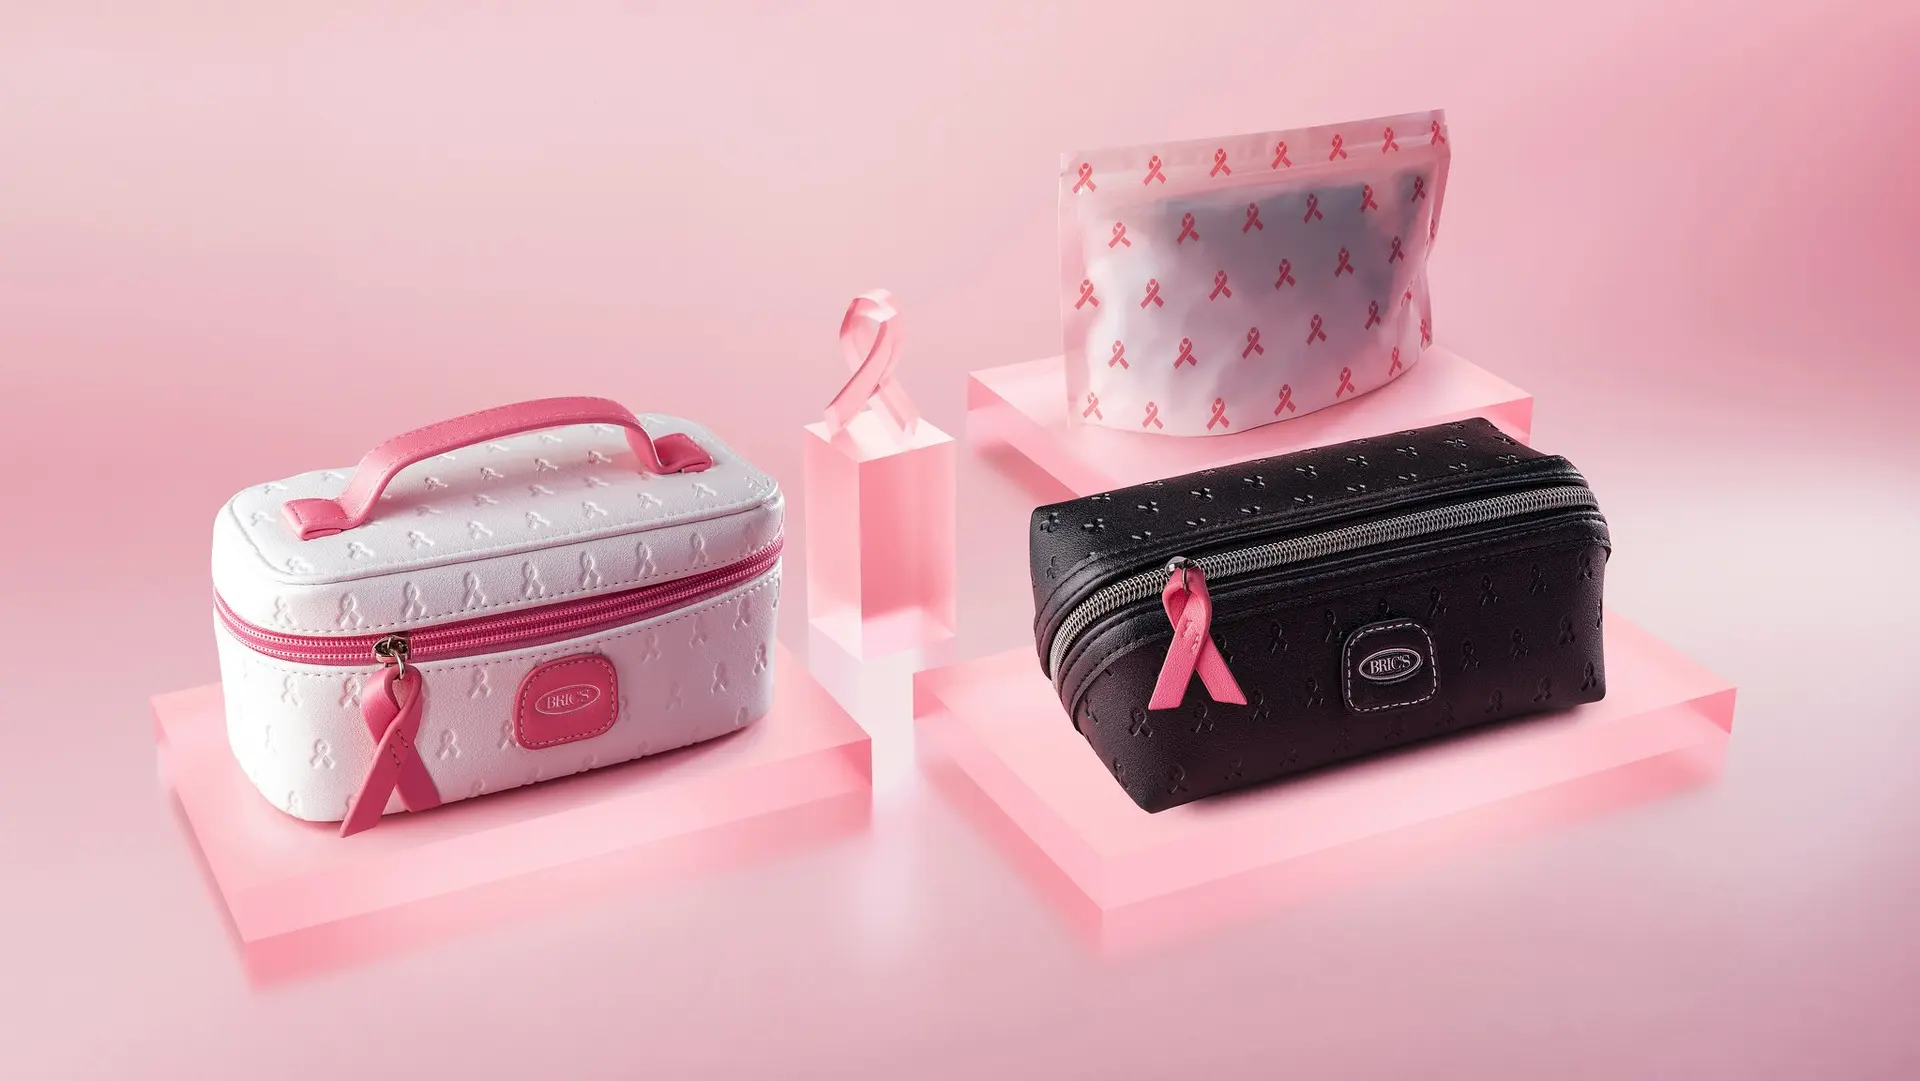 Airlines Articles - Qatar Airlines and Delta Air Lines support Breast Cancer Awareness Month